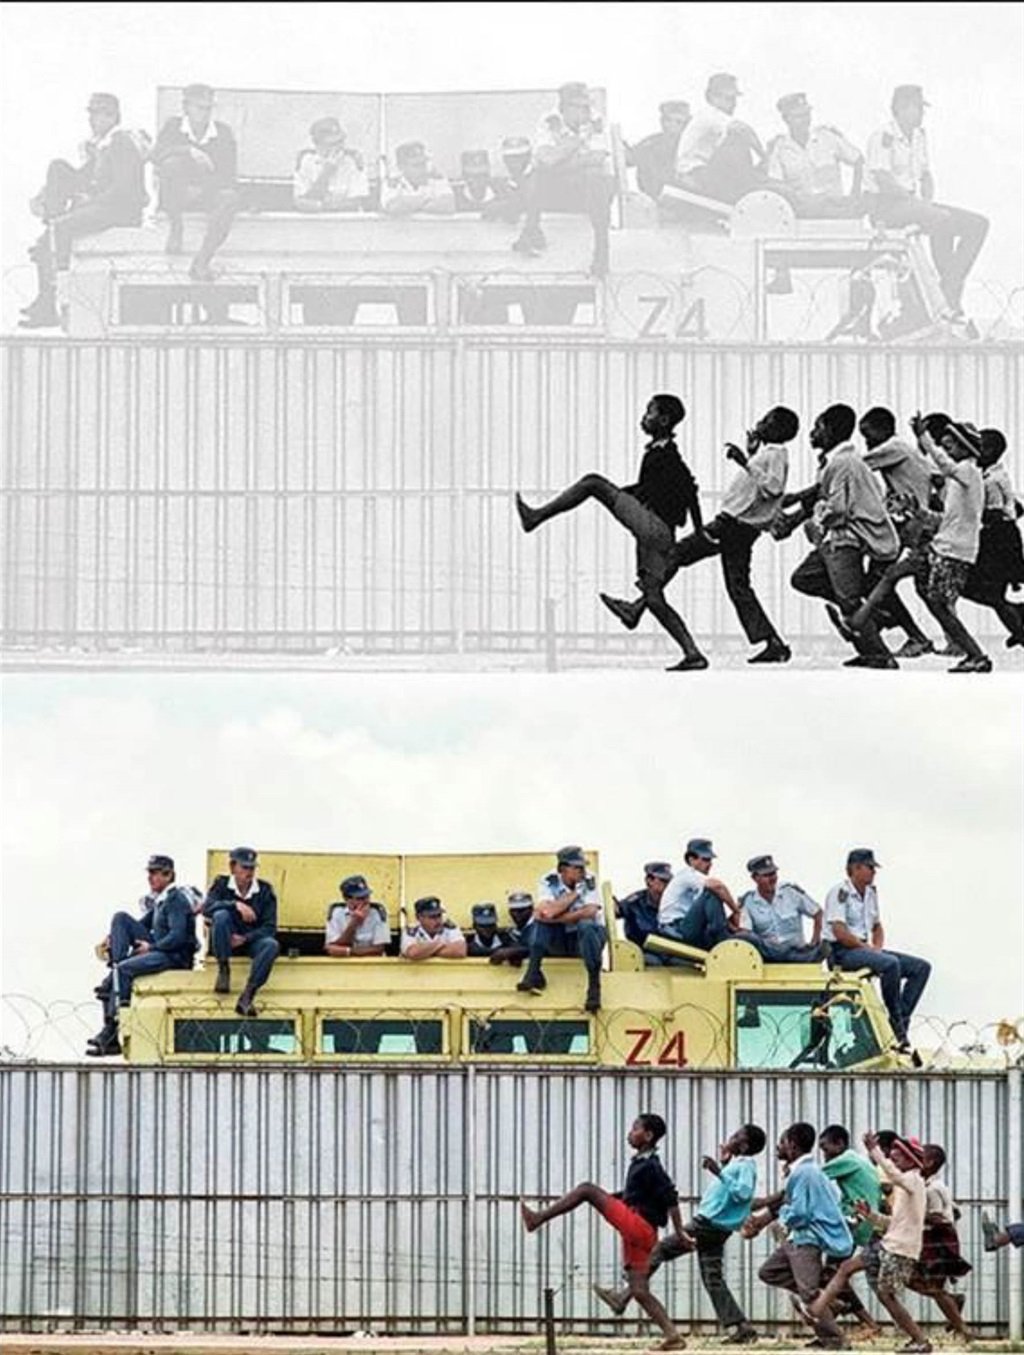 The before and after, the above image is an adaptation by famous American conceptual artist Hank Willis Thomas of a famous photo by South African photographer Graeme Williams PHOTO: 